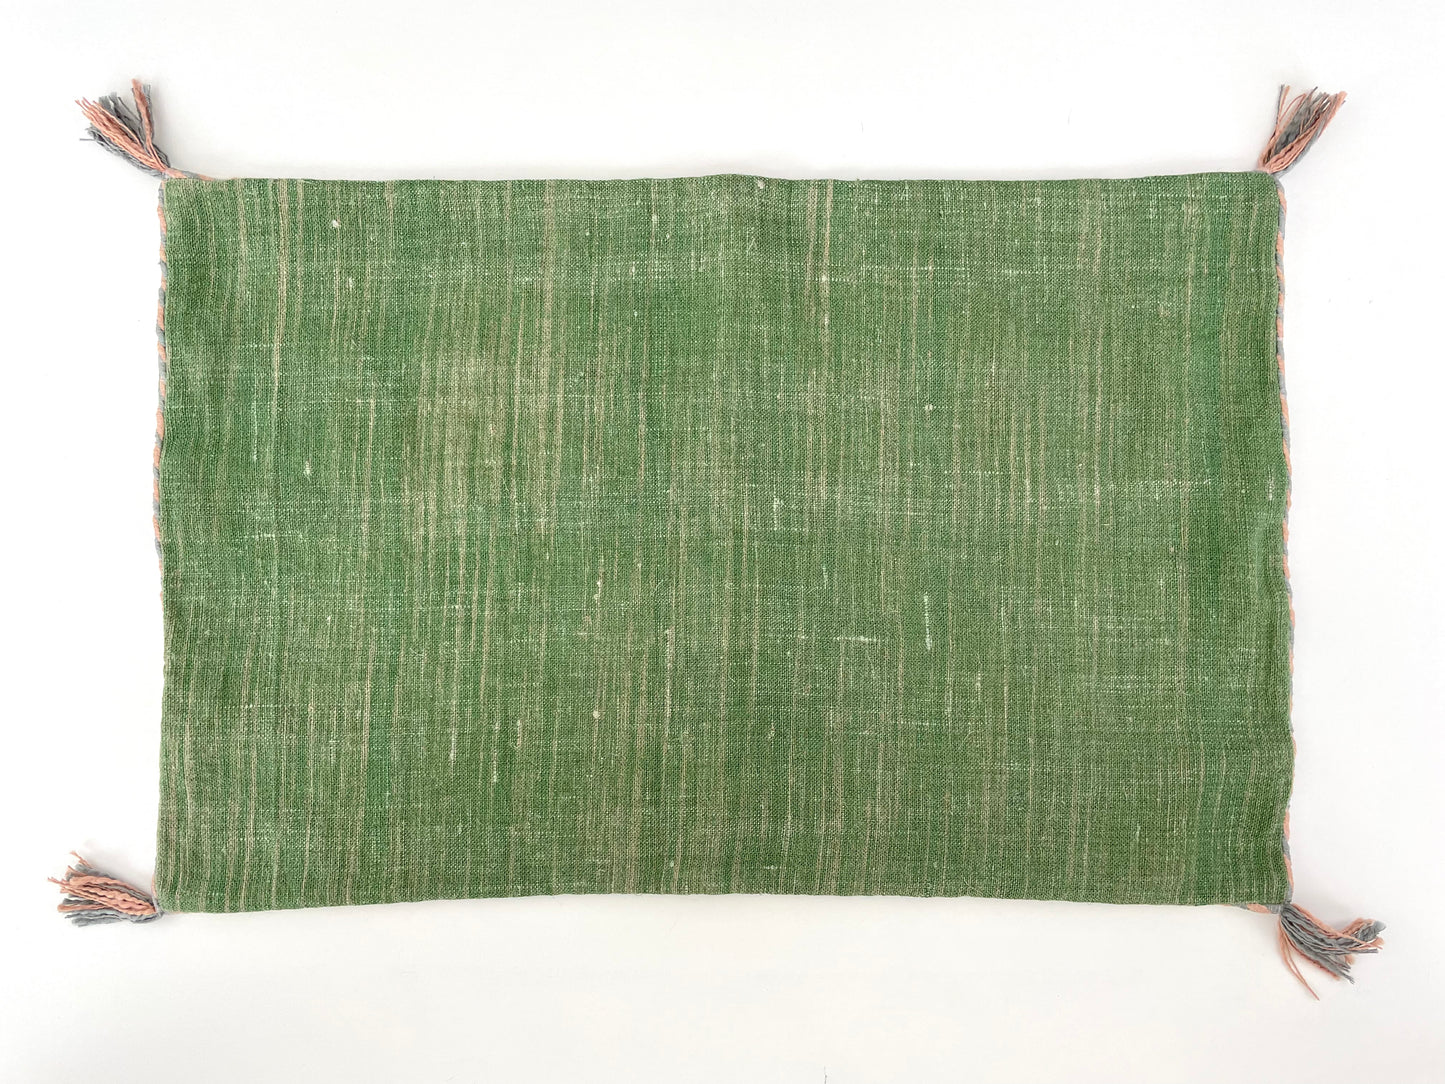 green linen 24x16 lumbar pillow cover with striped edging and tassels